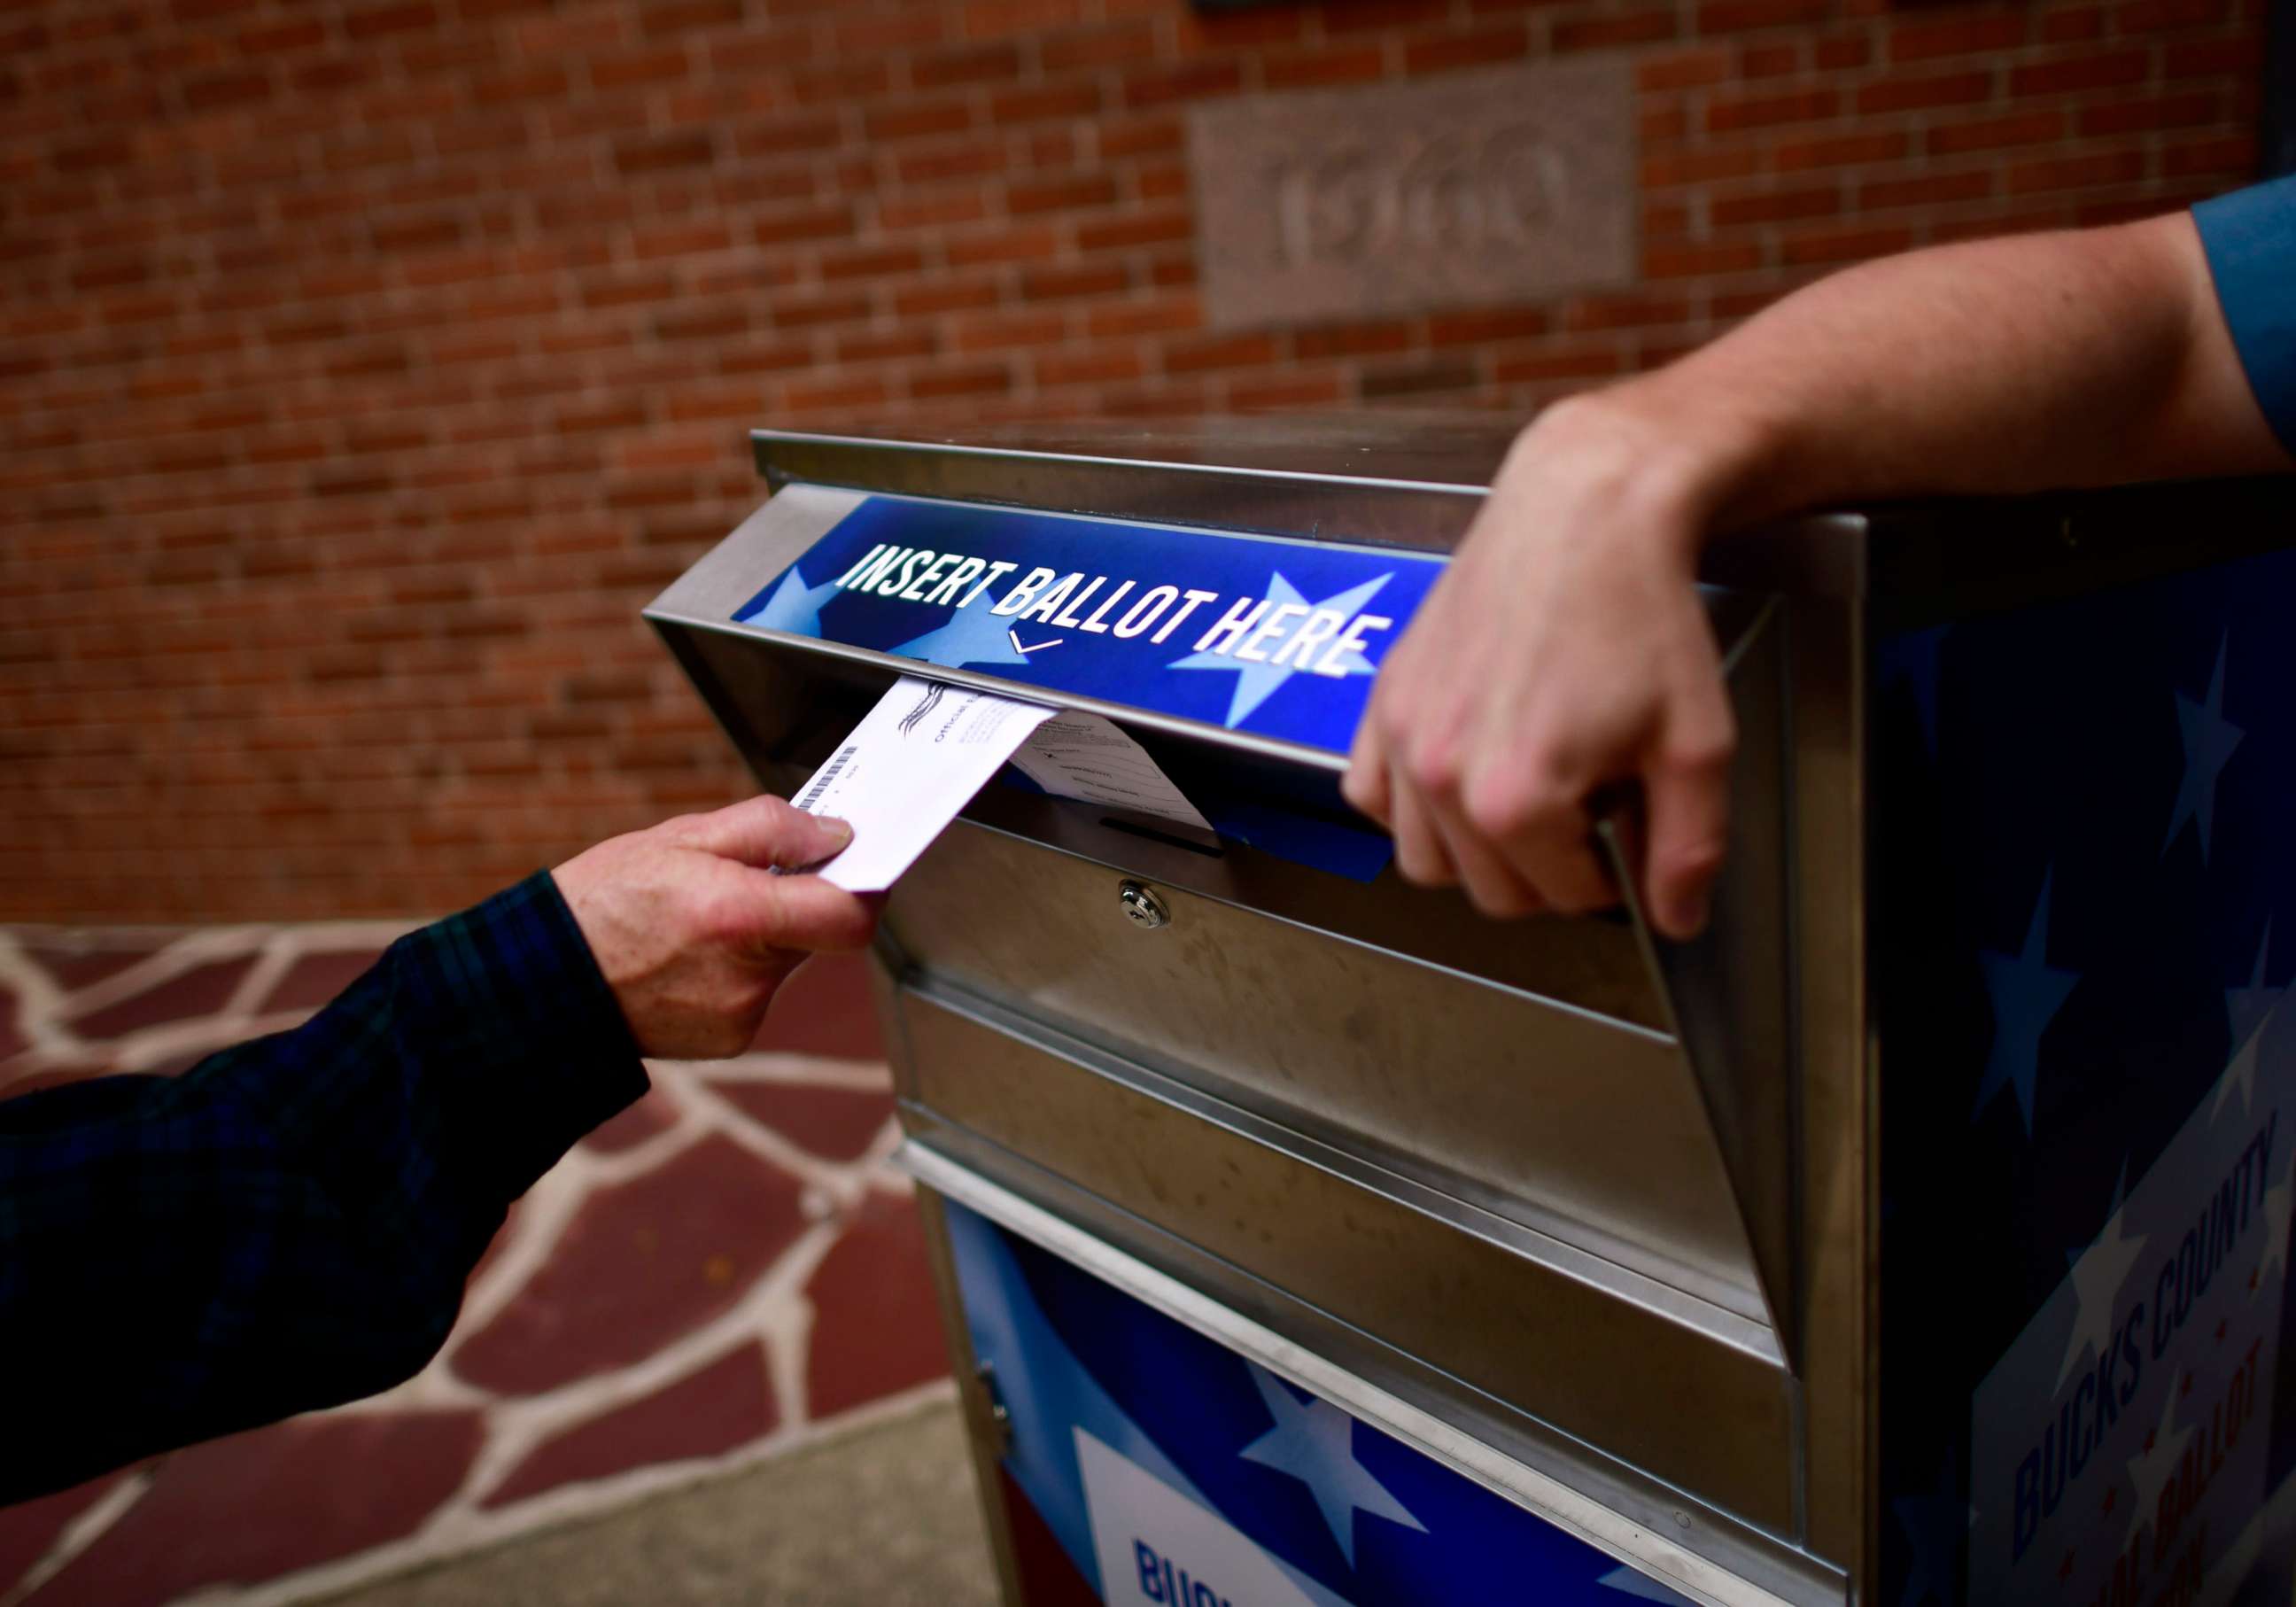 PHOTO: In this June 2, 2020, file photo, a primary voter drops a mail-in ballot into a drop box outside the Bucks County Courthouse in Doylestown, Pa., on June 2, 2020.